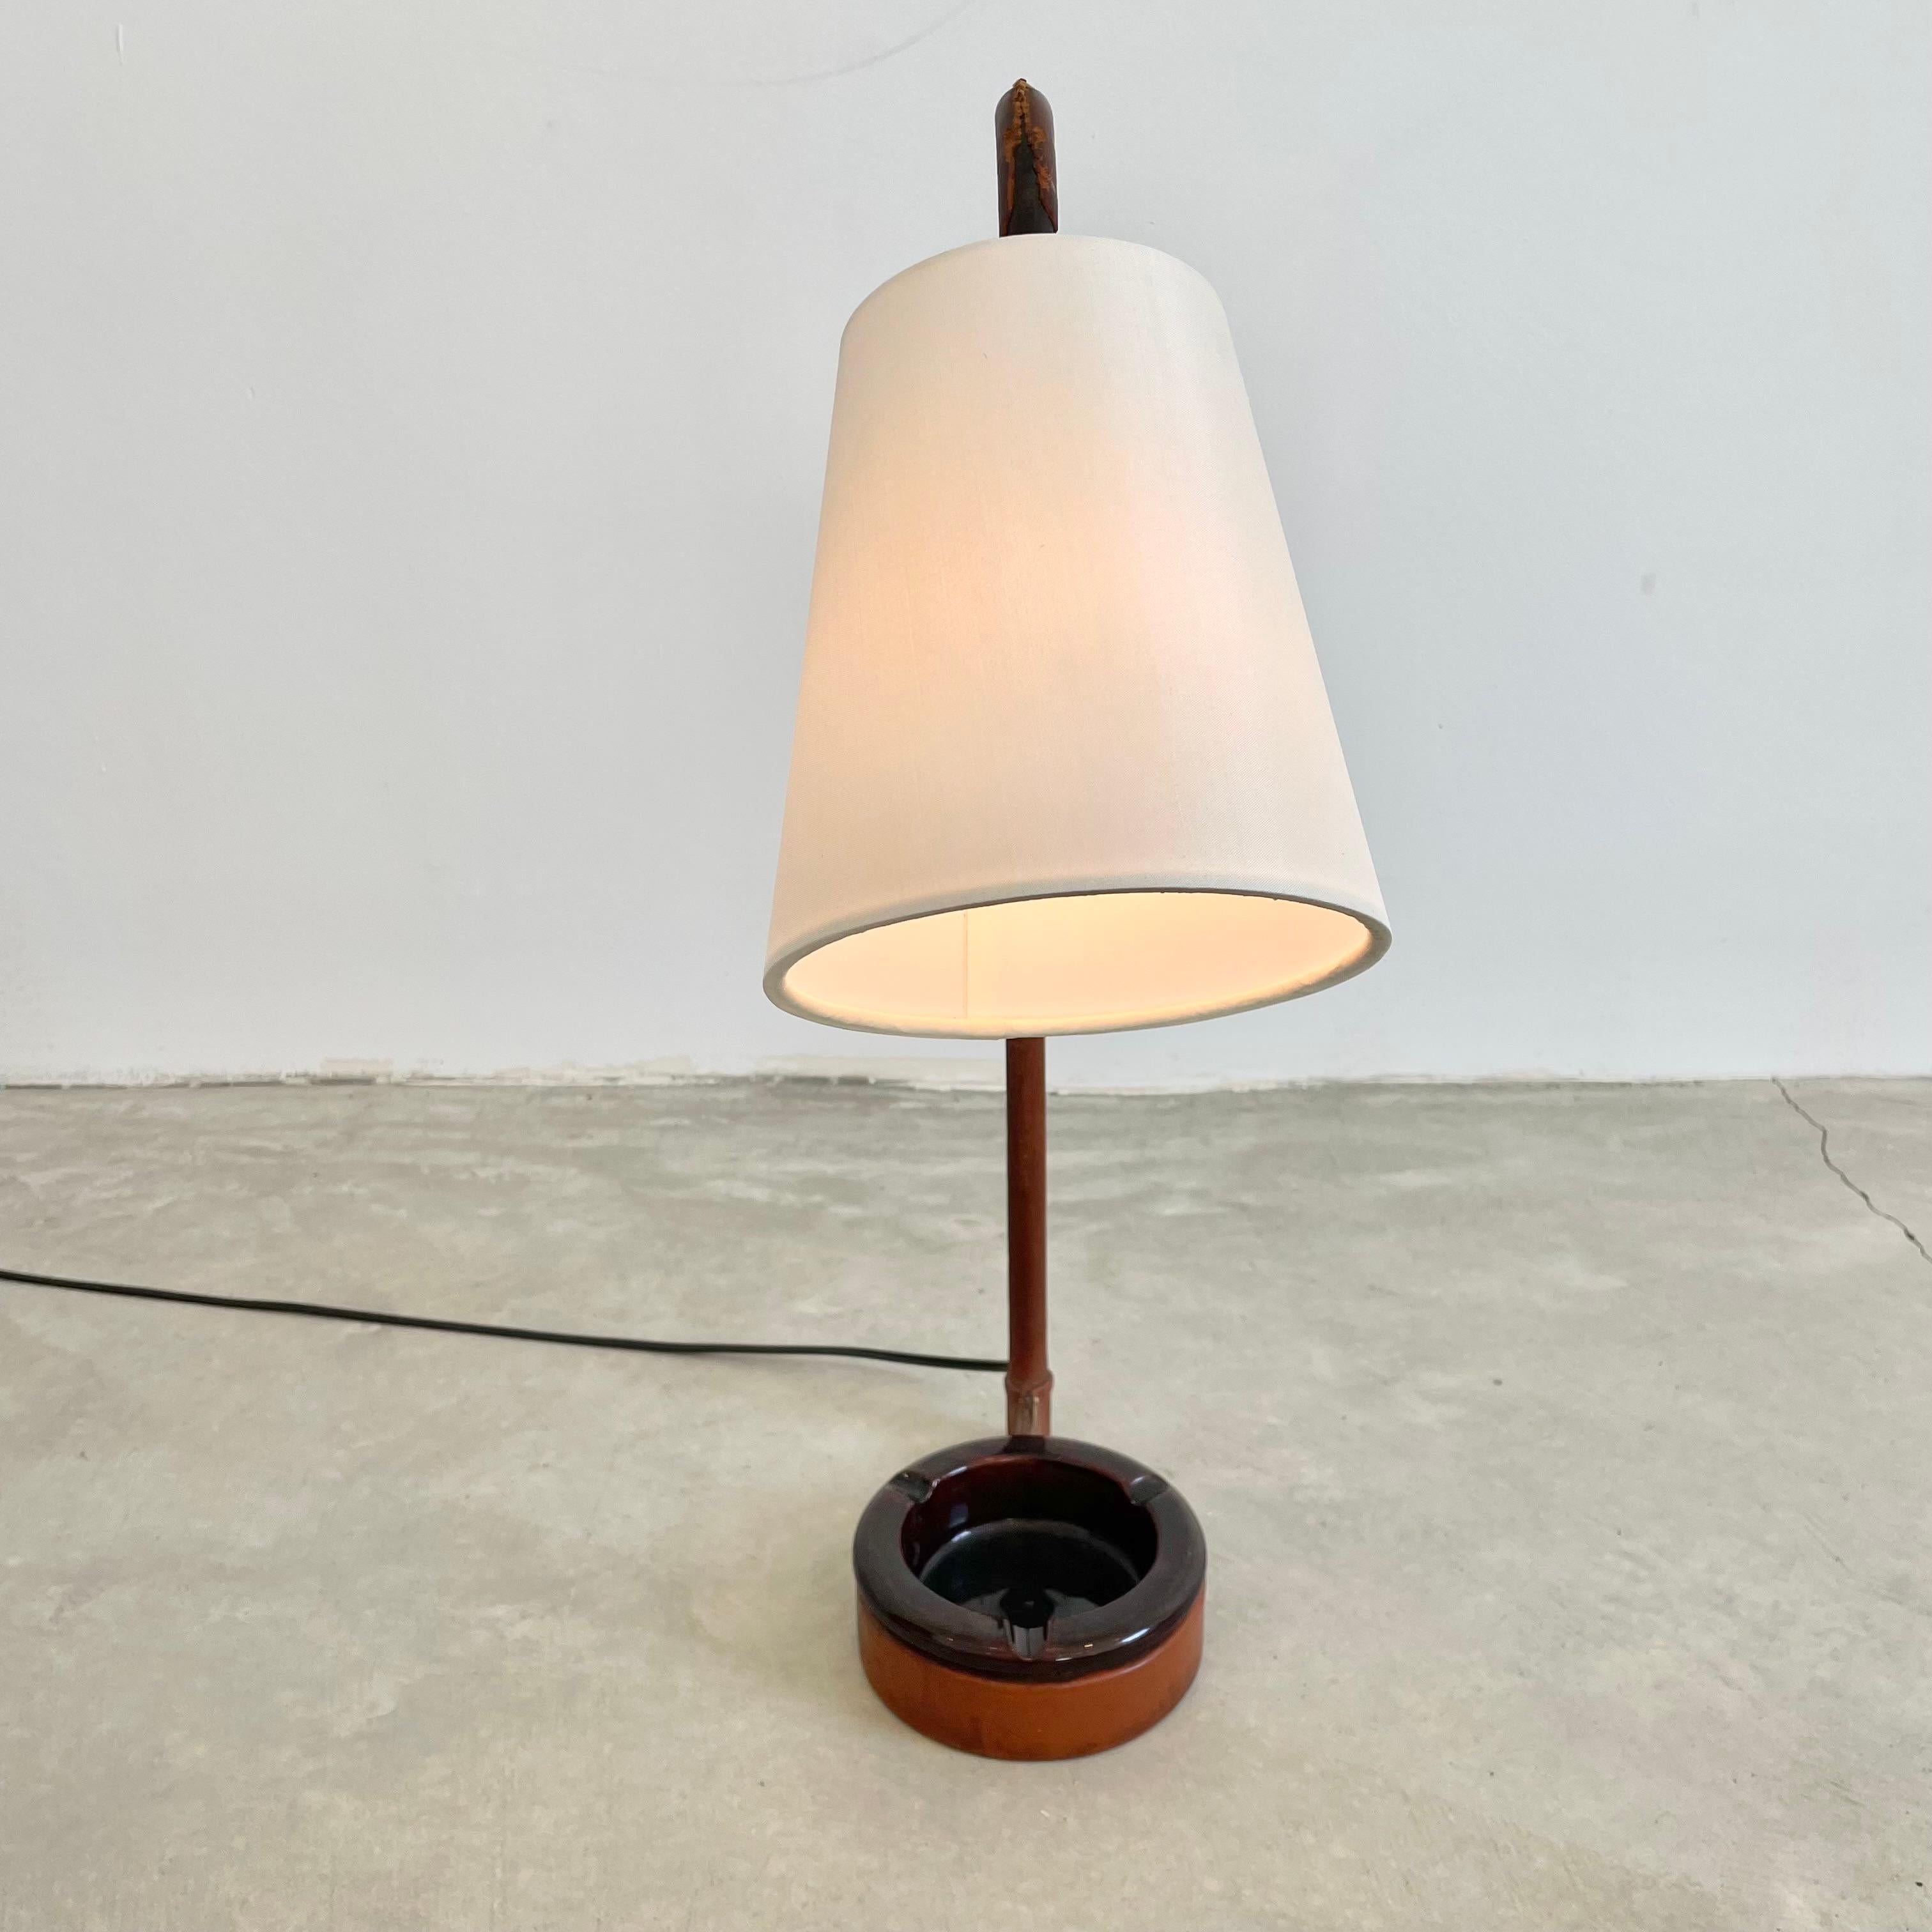 Beautiful Jacques Adnet leather table lamp with brown ceramic ashtray/catchall inset into the base. Metal frame completely wrapped in a tan saddle leather. Lamp is on a ball socket allowing the light to be pointed in different directions. Signature